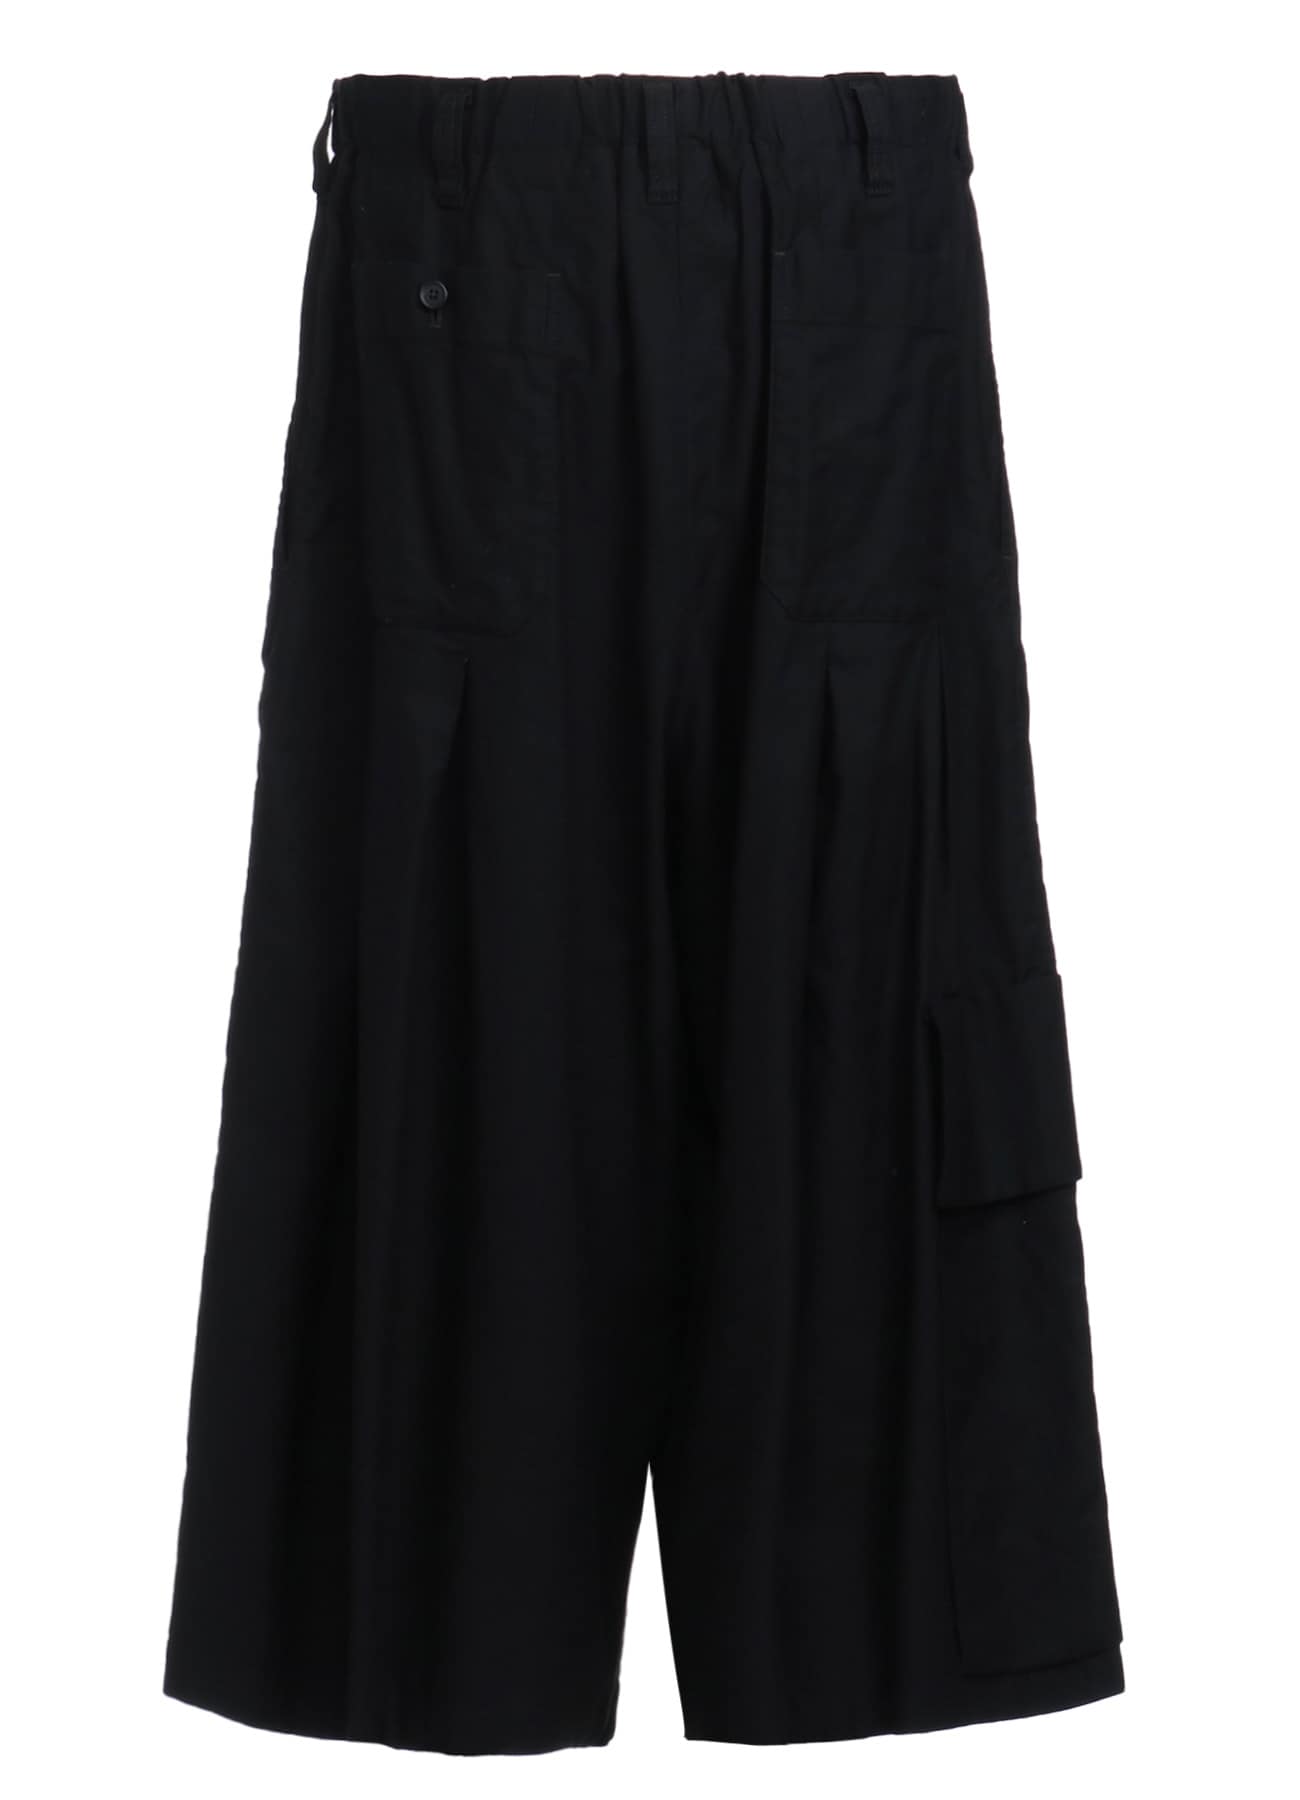 COTTON TWILL CROPPED WIDE PANTS WITH GUSSETED FLAP POCKET(M Black 